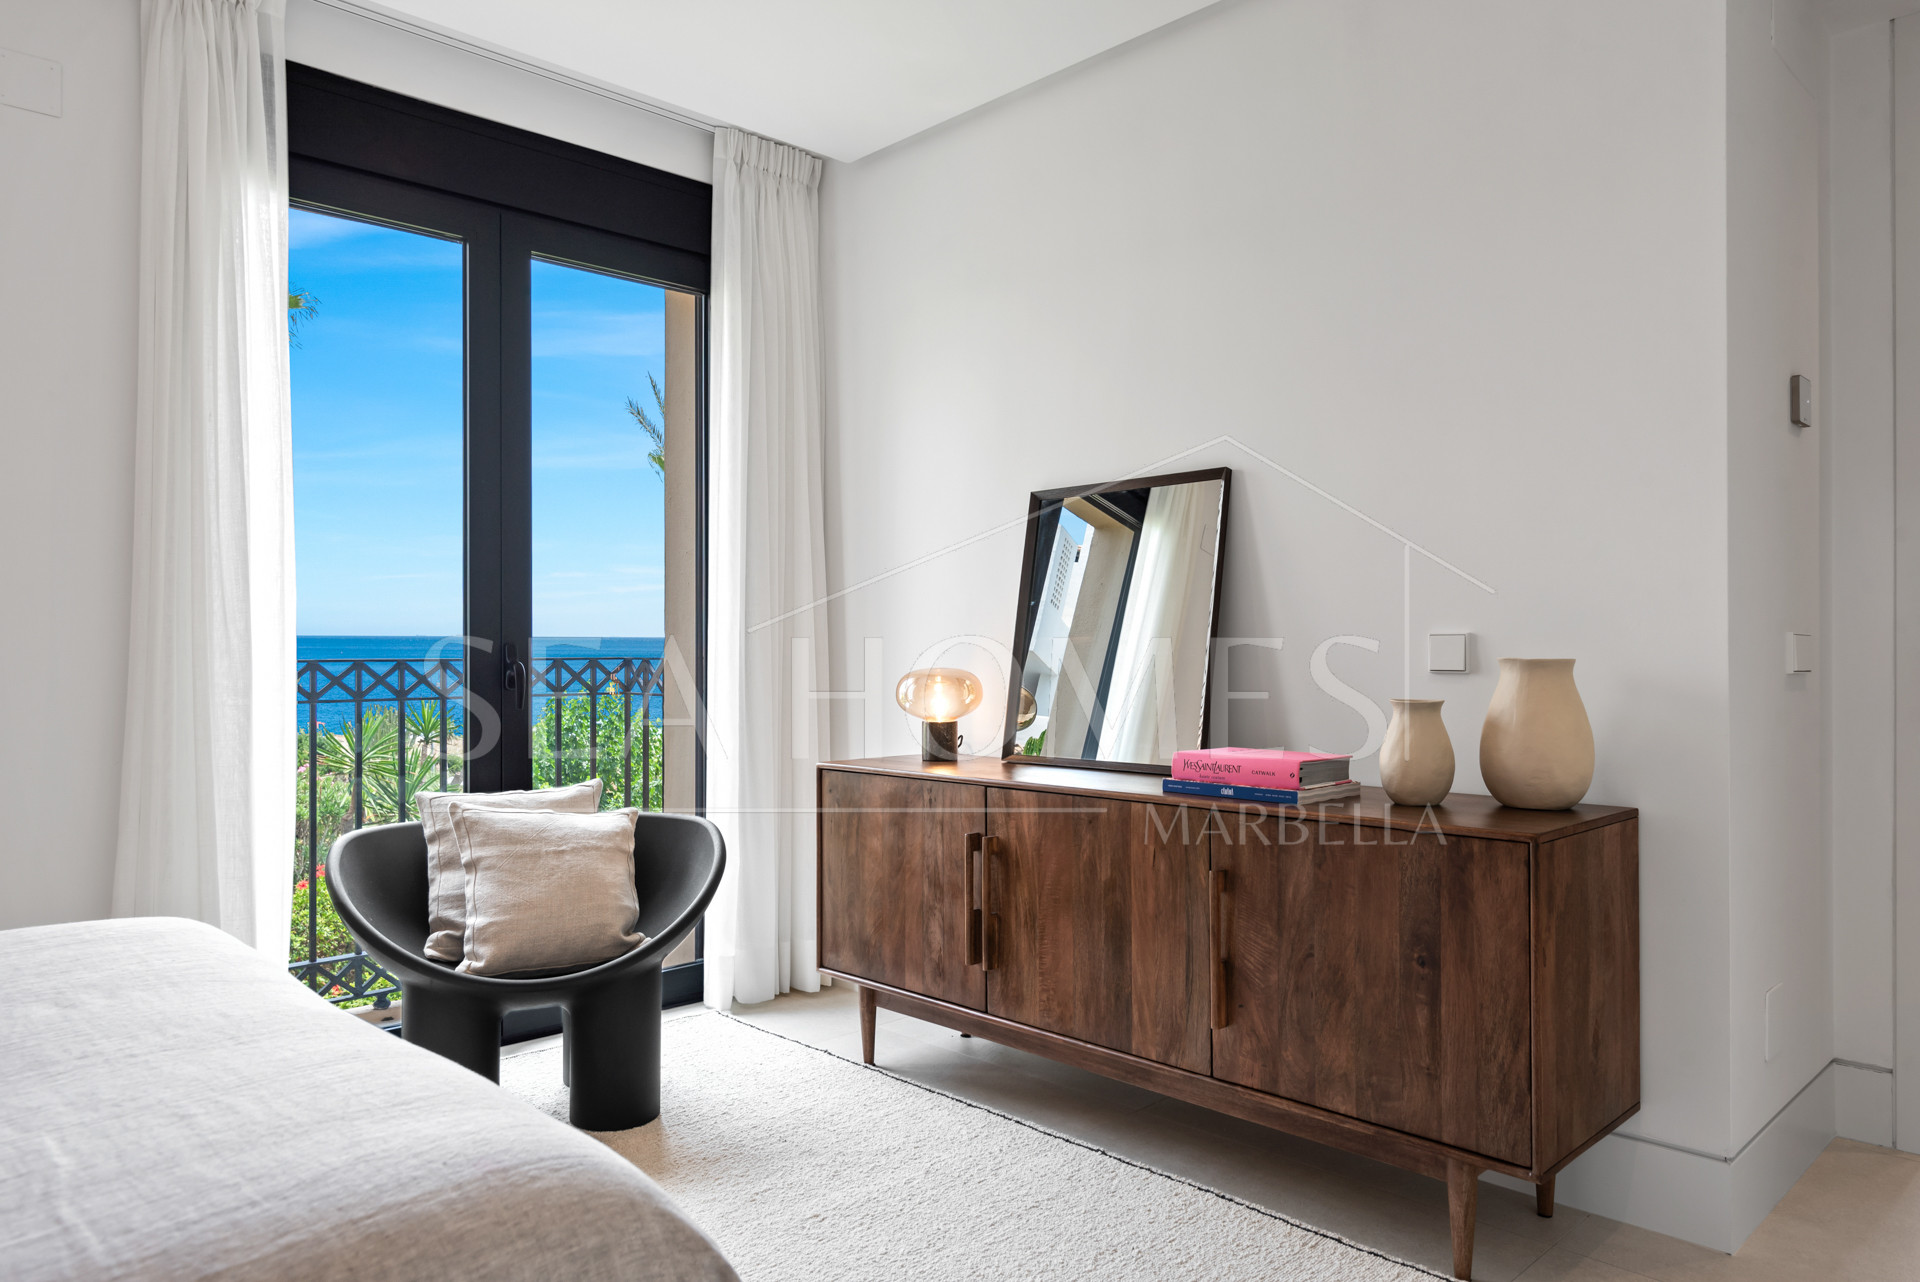 Prime Beachfront Living at Costalita del Mar: Modern Refurbished Apartment with Sweeping Sea Views and Exclusive Amenities